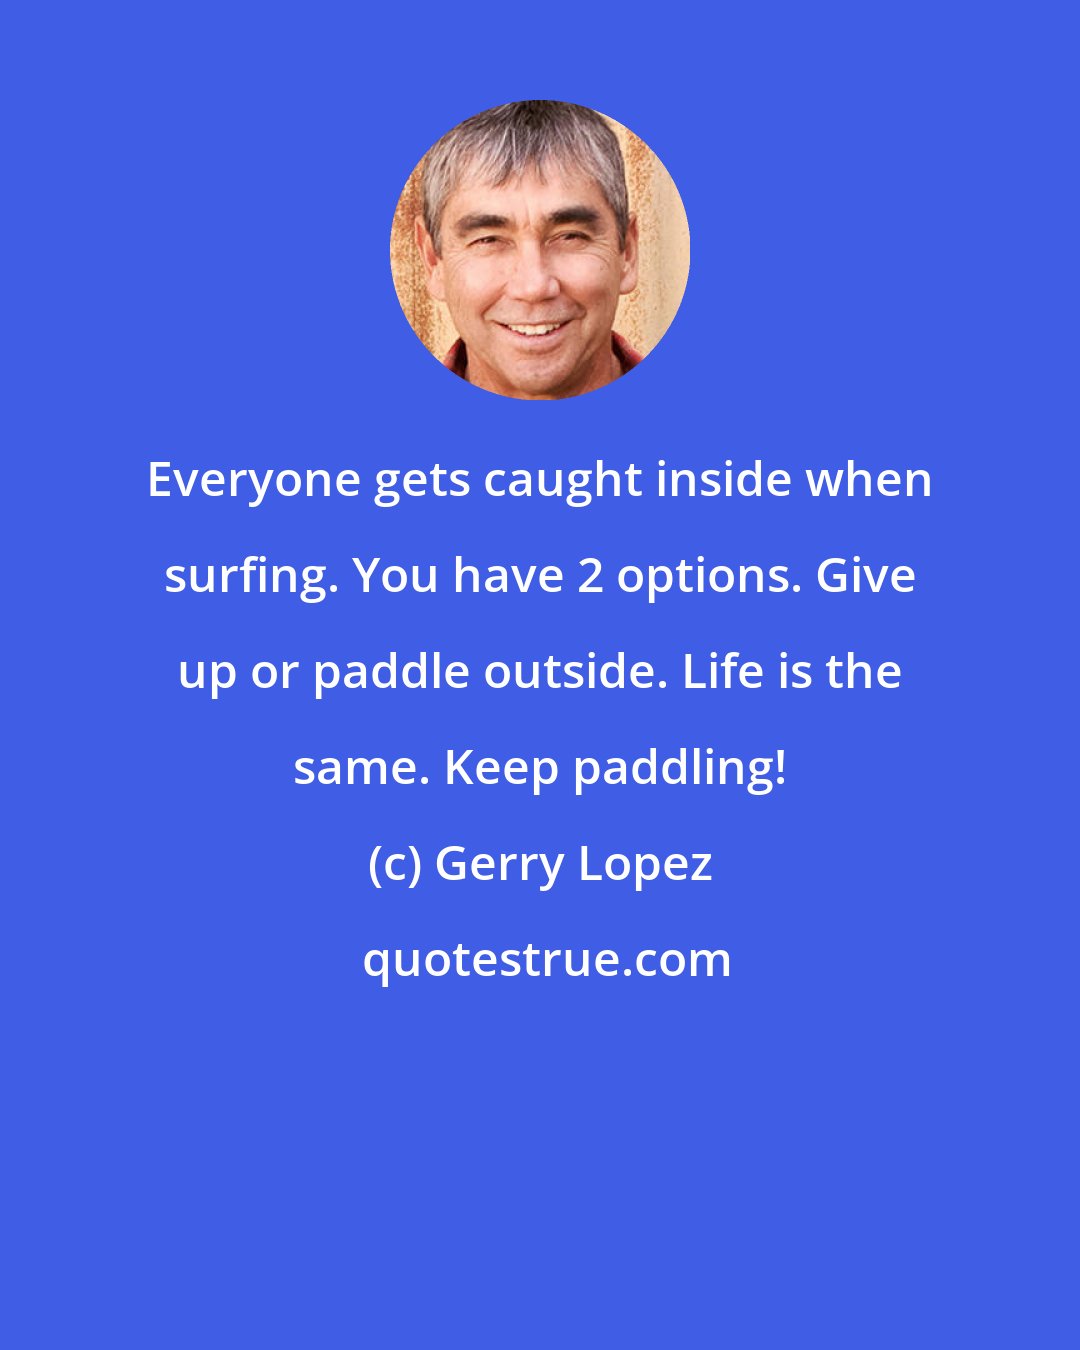 Gerry Lopez: Everyone gets caught inside when surfing. You have 2 options. Give up or paddle outside. Life is the same. Keep paddling!